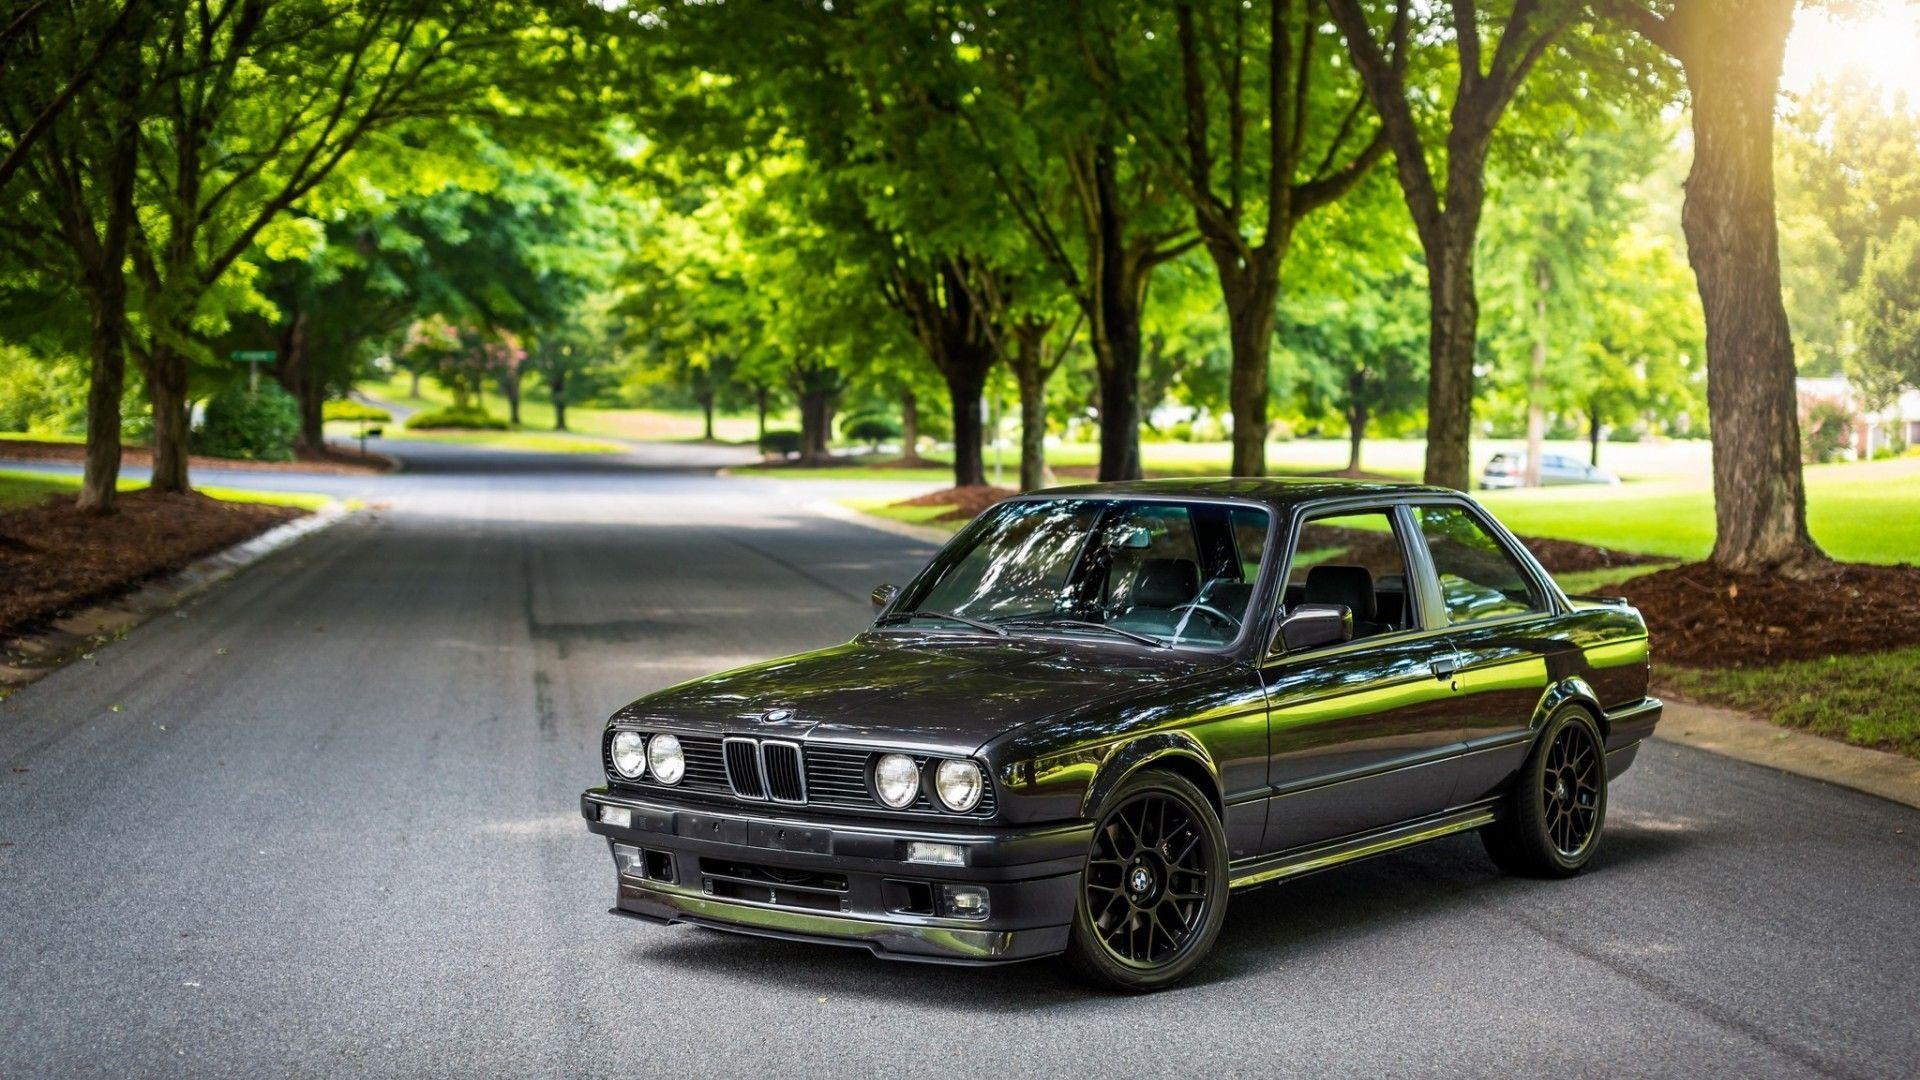 4K Ultra HD Bmw E30 Wallpaper, Background and Picture for Free